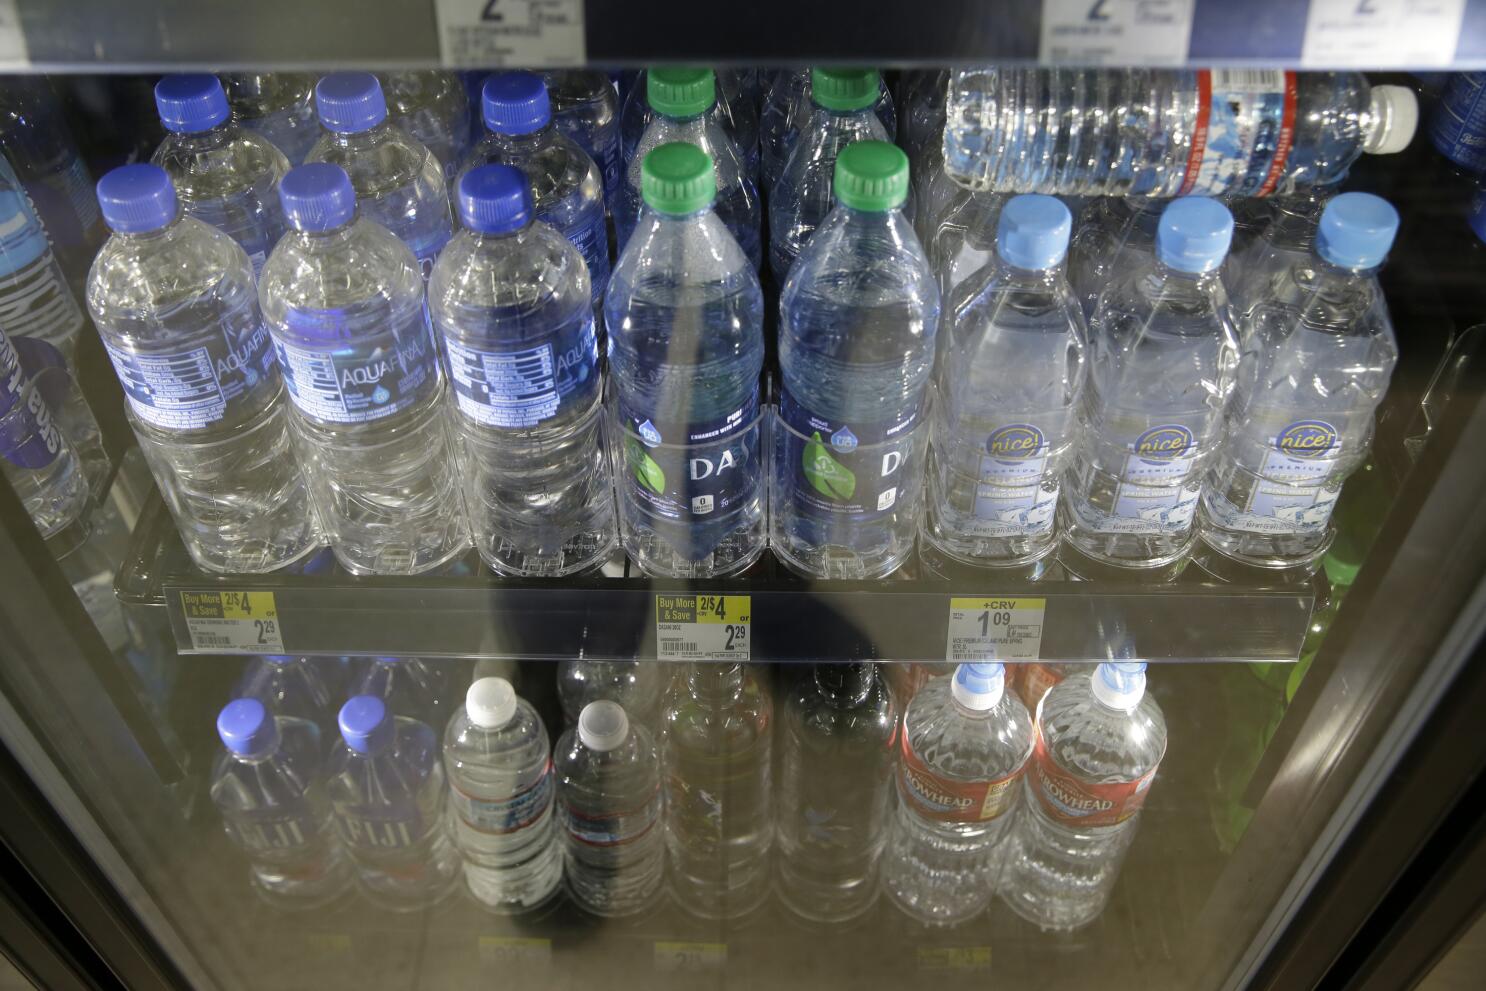 Is Bottled Water Safe to Drink? The Answer May Surprise You!